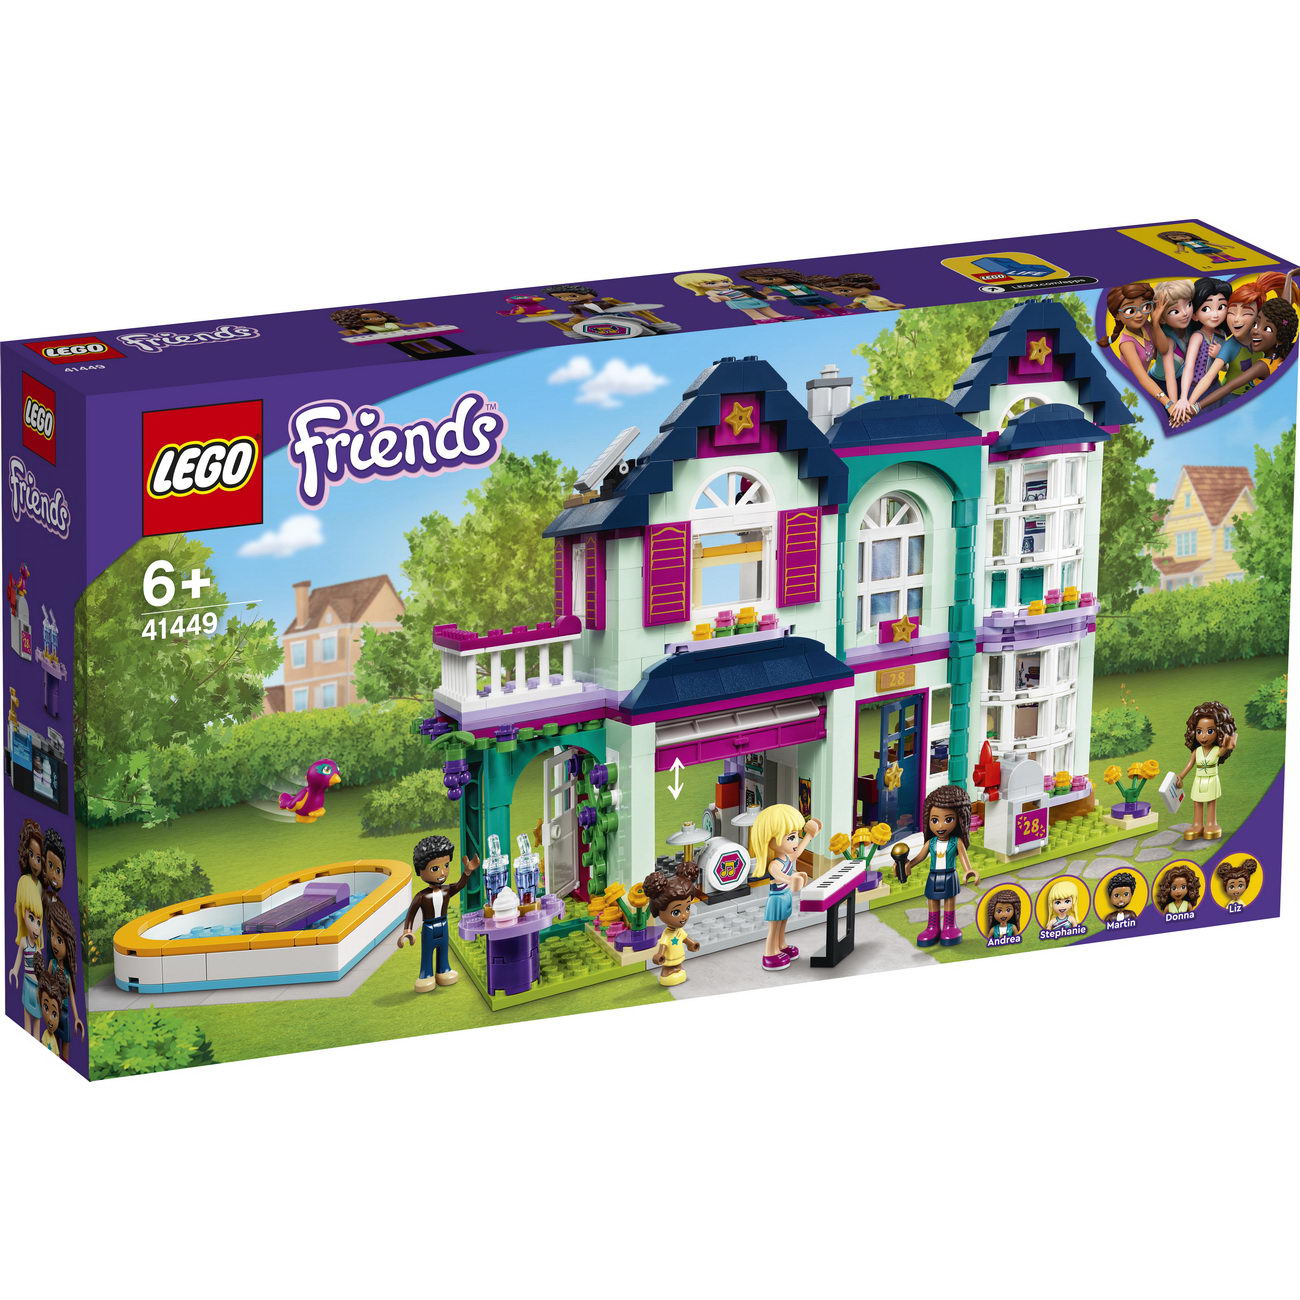 LEGO Friends 41449 - Andreas Haus